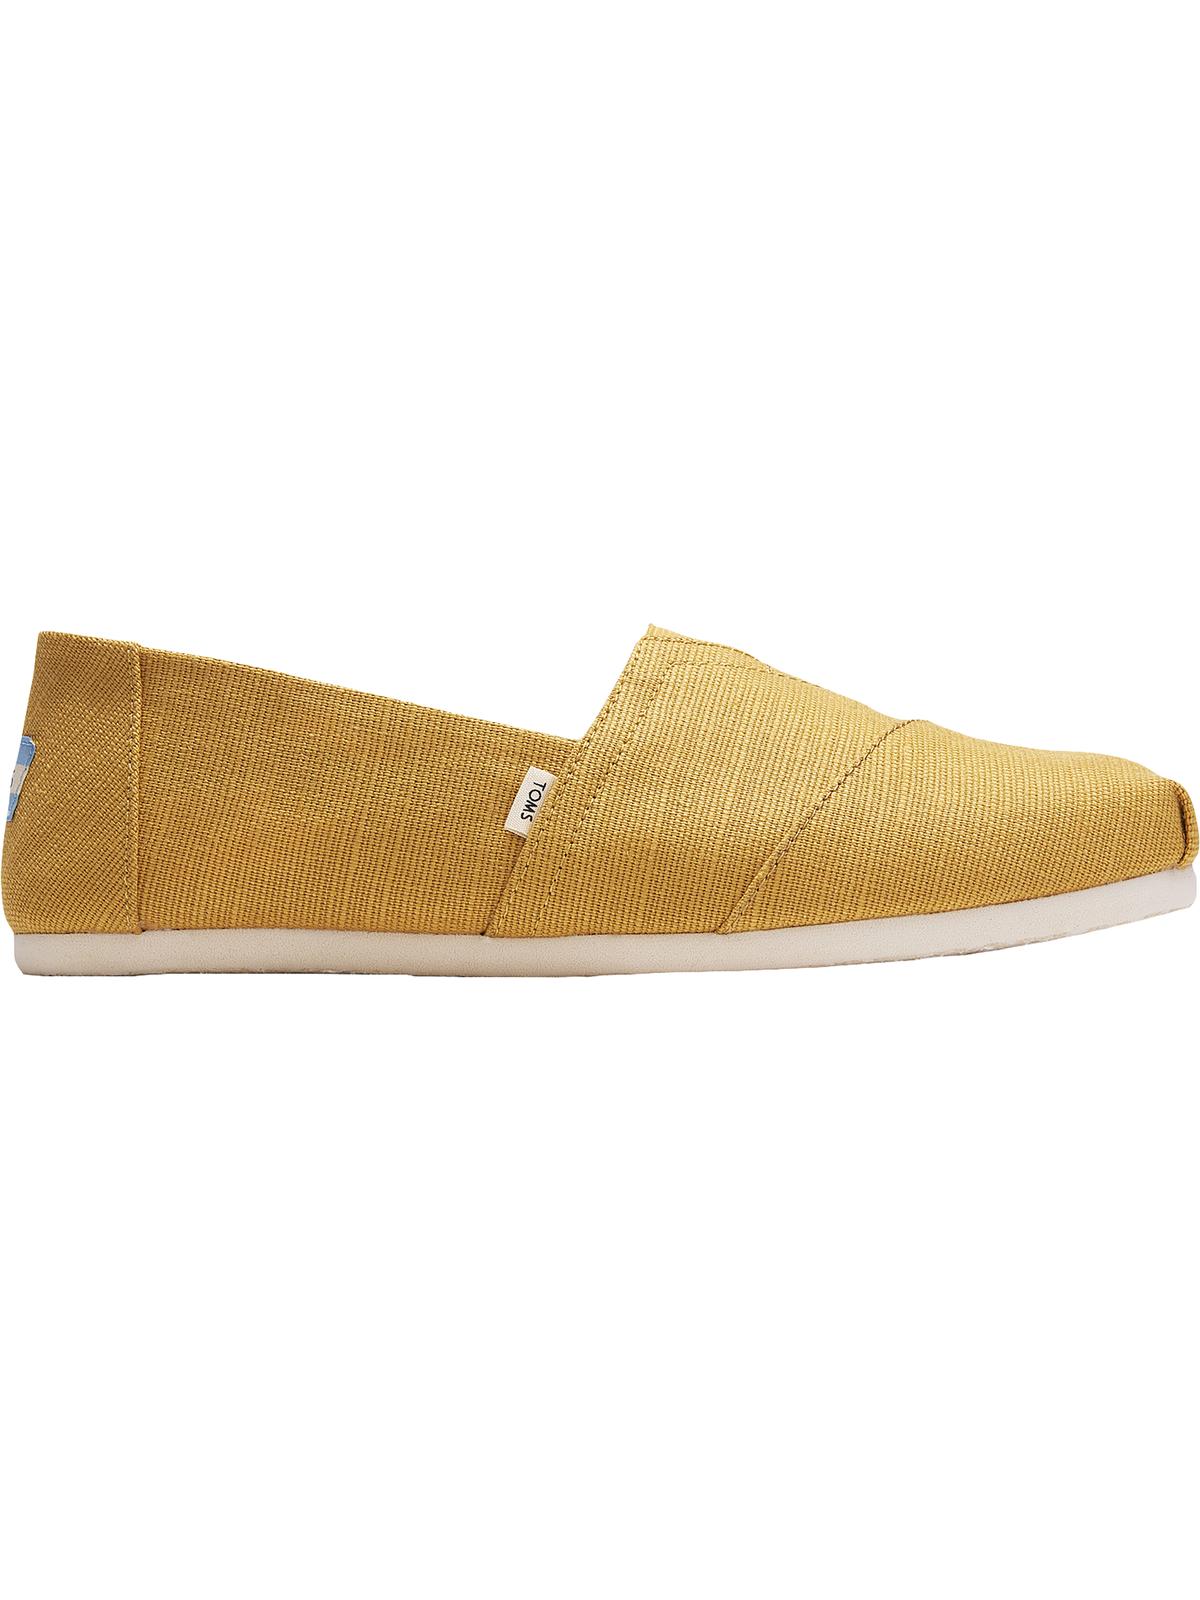 Toms Mens Classic Canvas Slip On Casual Shoes - image 1 of 3